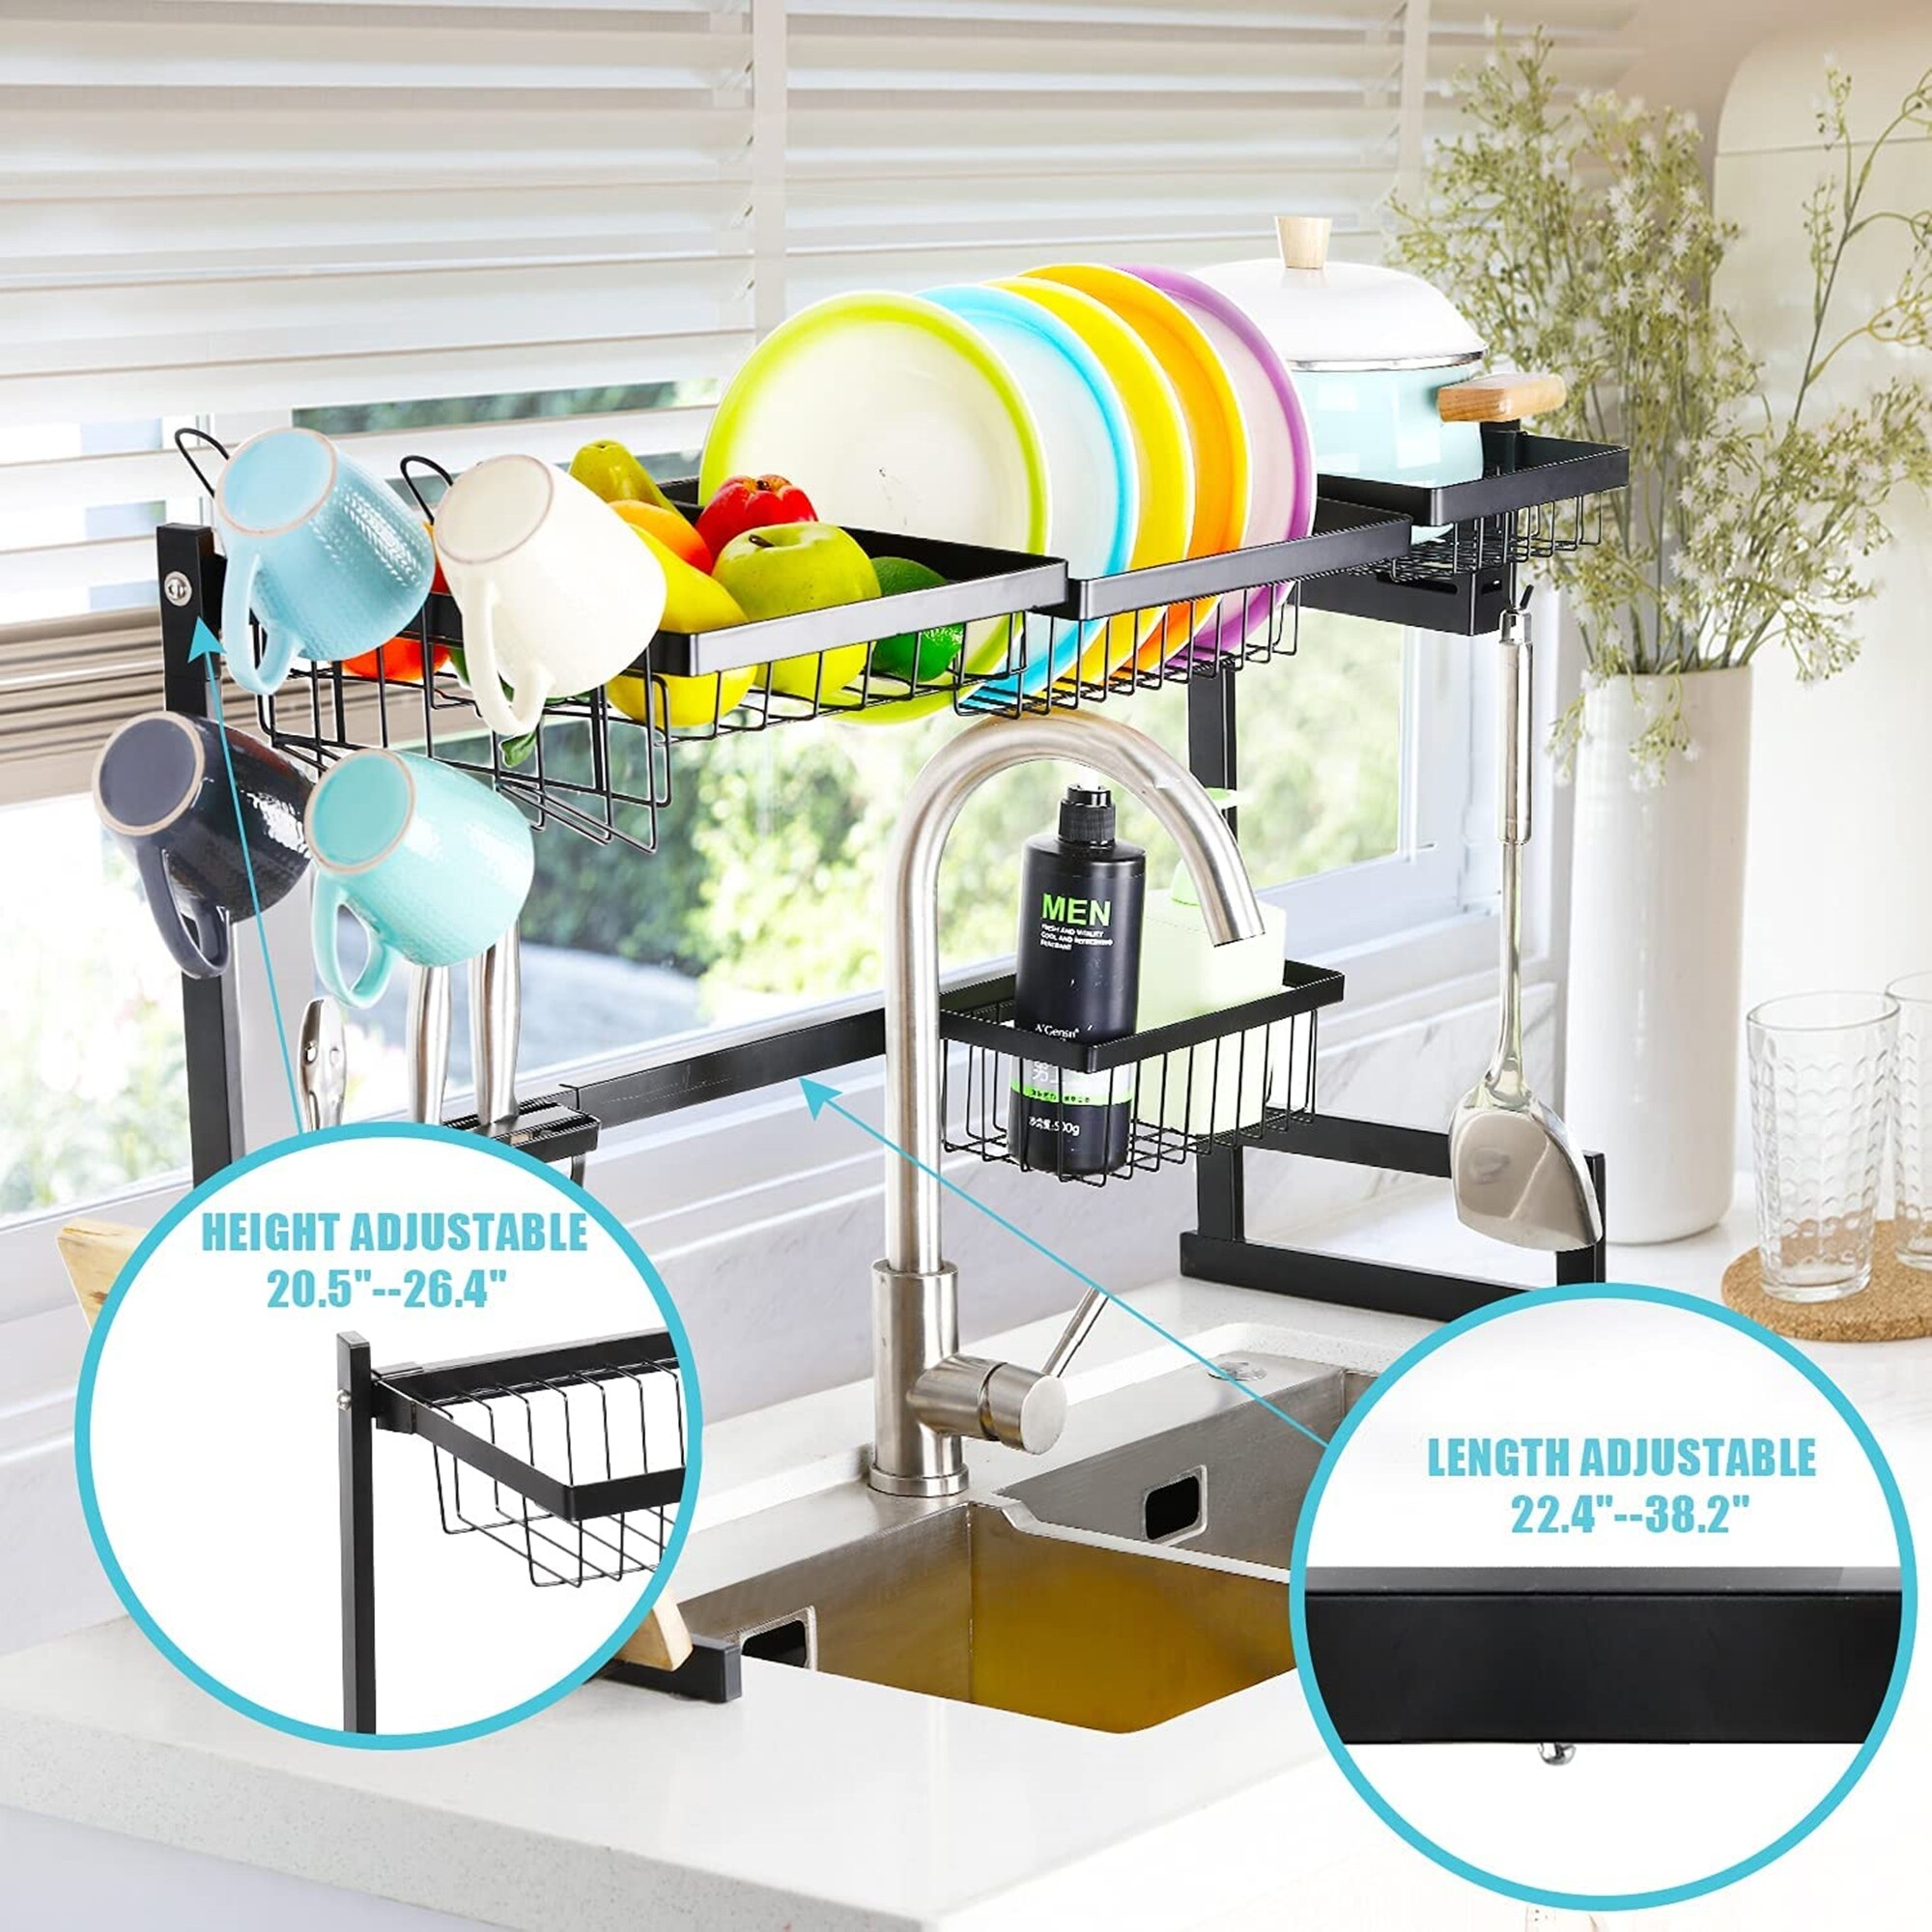 https://ak1.ostkcdn.com/images/products/is/images/direct/ef0afd0c1ca3547101608d7a1f303ea81befb566/Adjustable-Stainless-Steel-Over-Sink-Dish-Drying-Rack.jpg